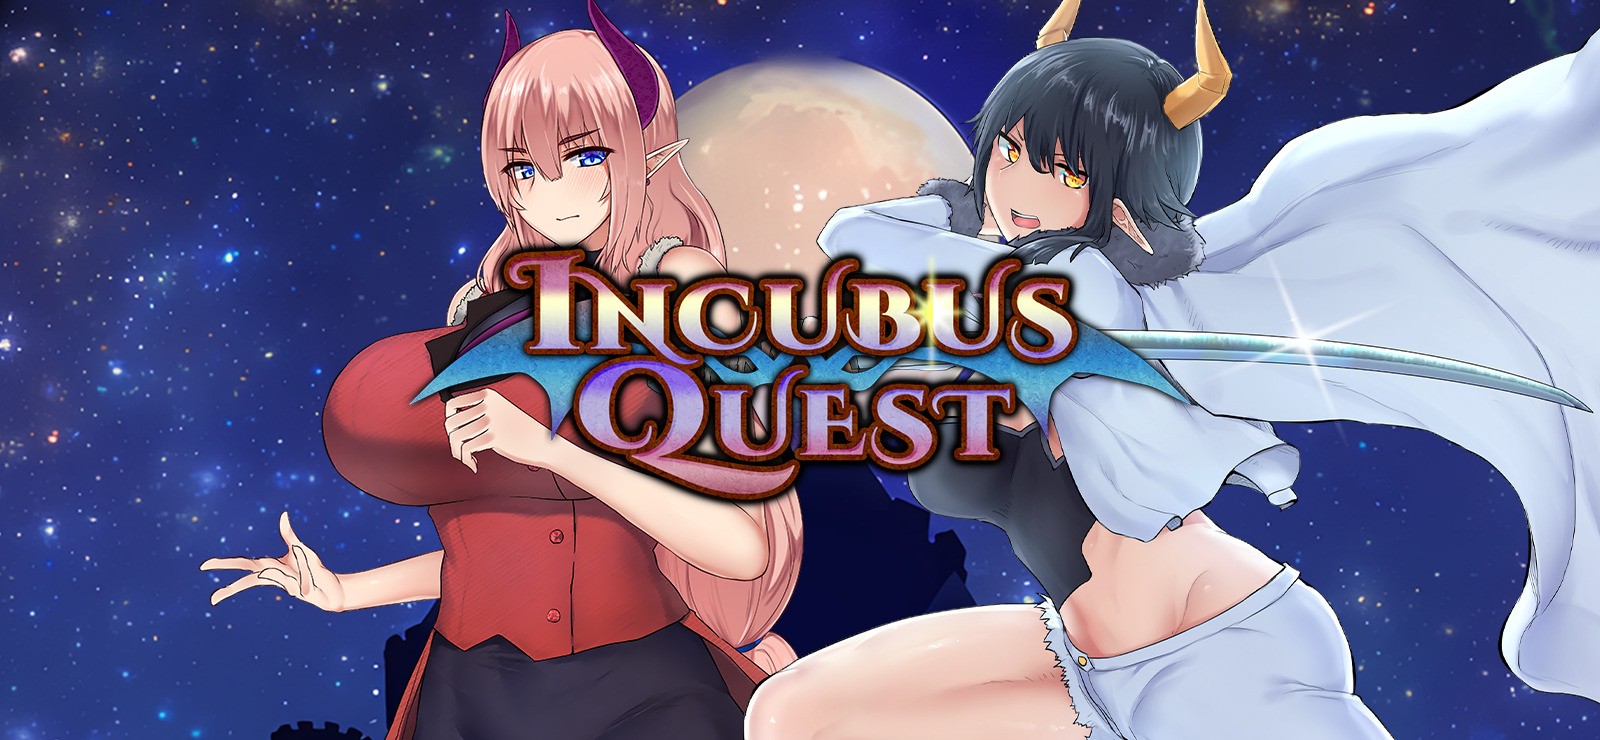 Incubus Quest Adult Game Android Apk Download